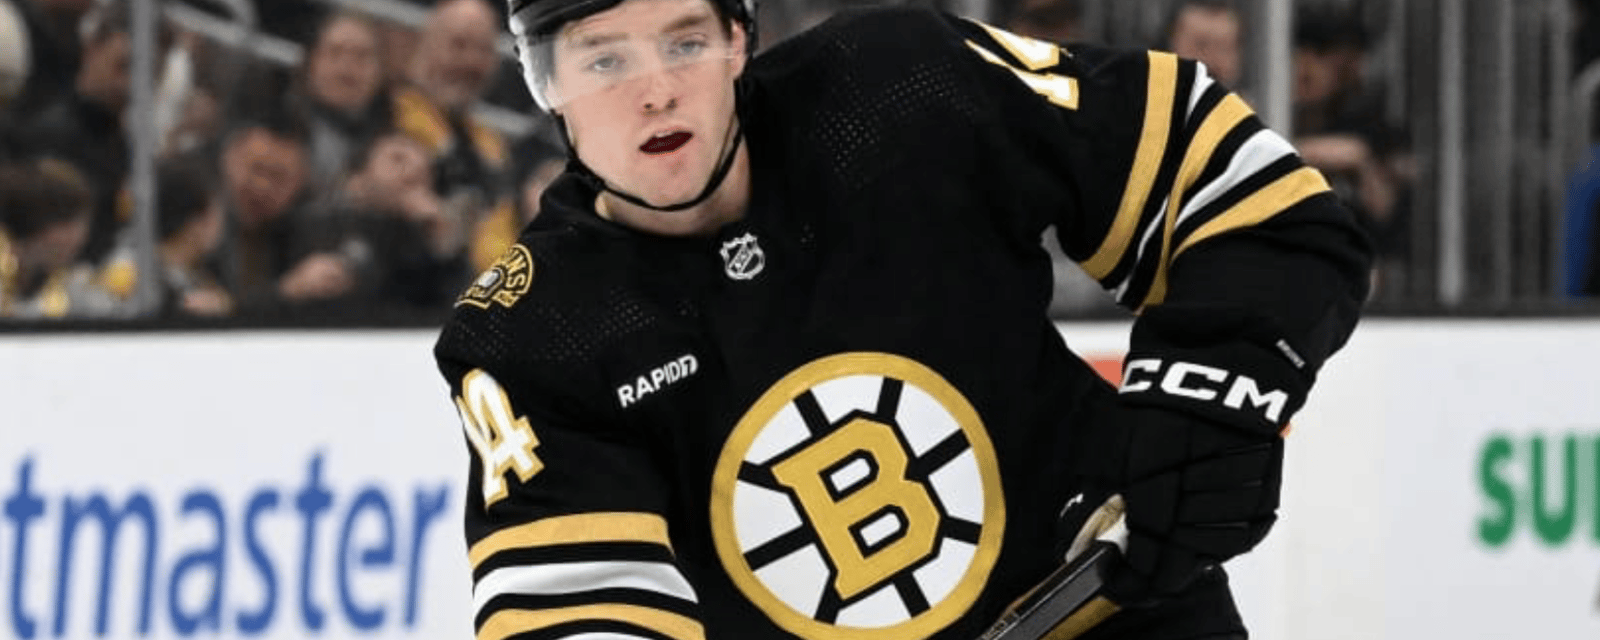 Bruins defenseman lands on waivers for 2nd time this season